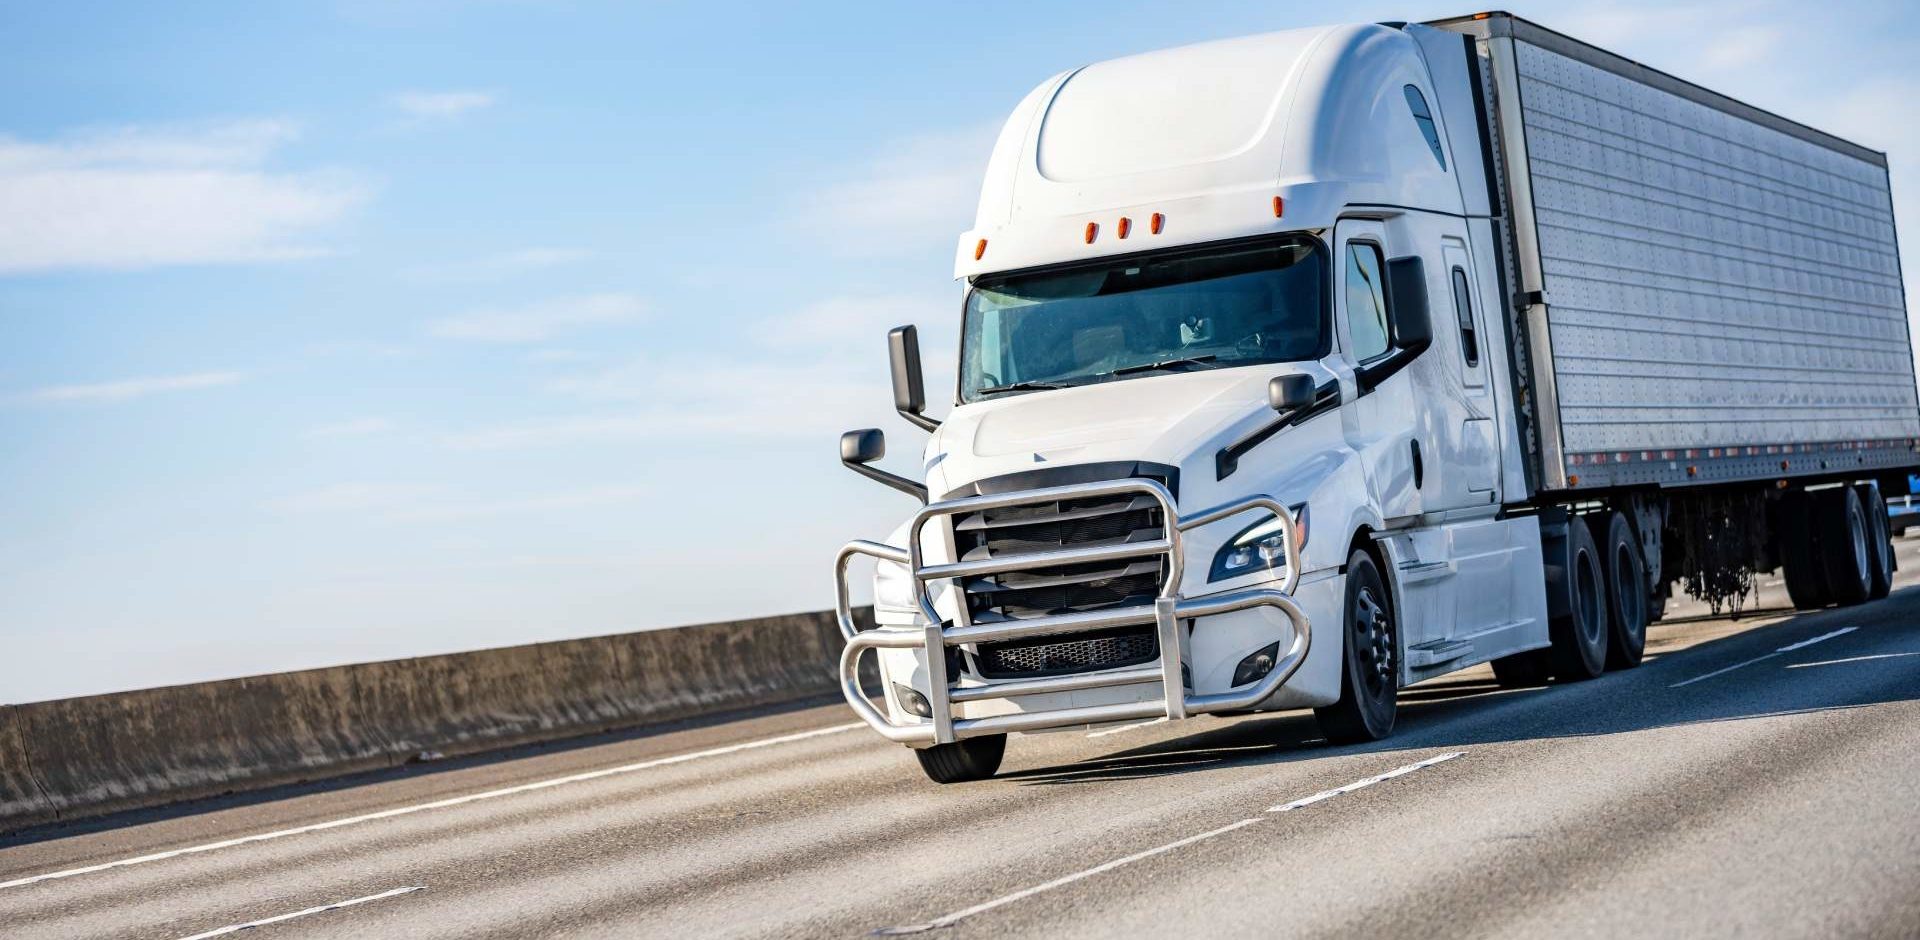 How Common is Brake Failure in Truck Accident Injuries?